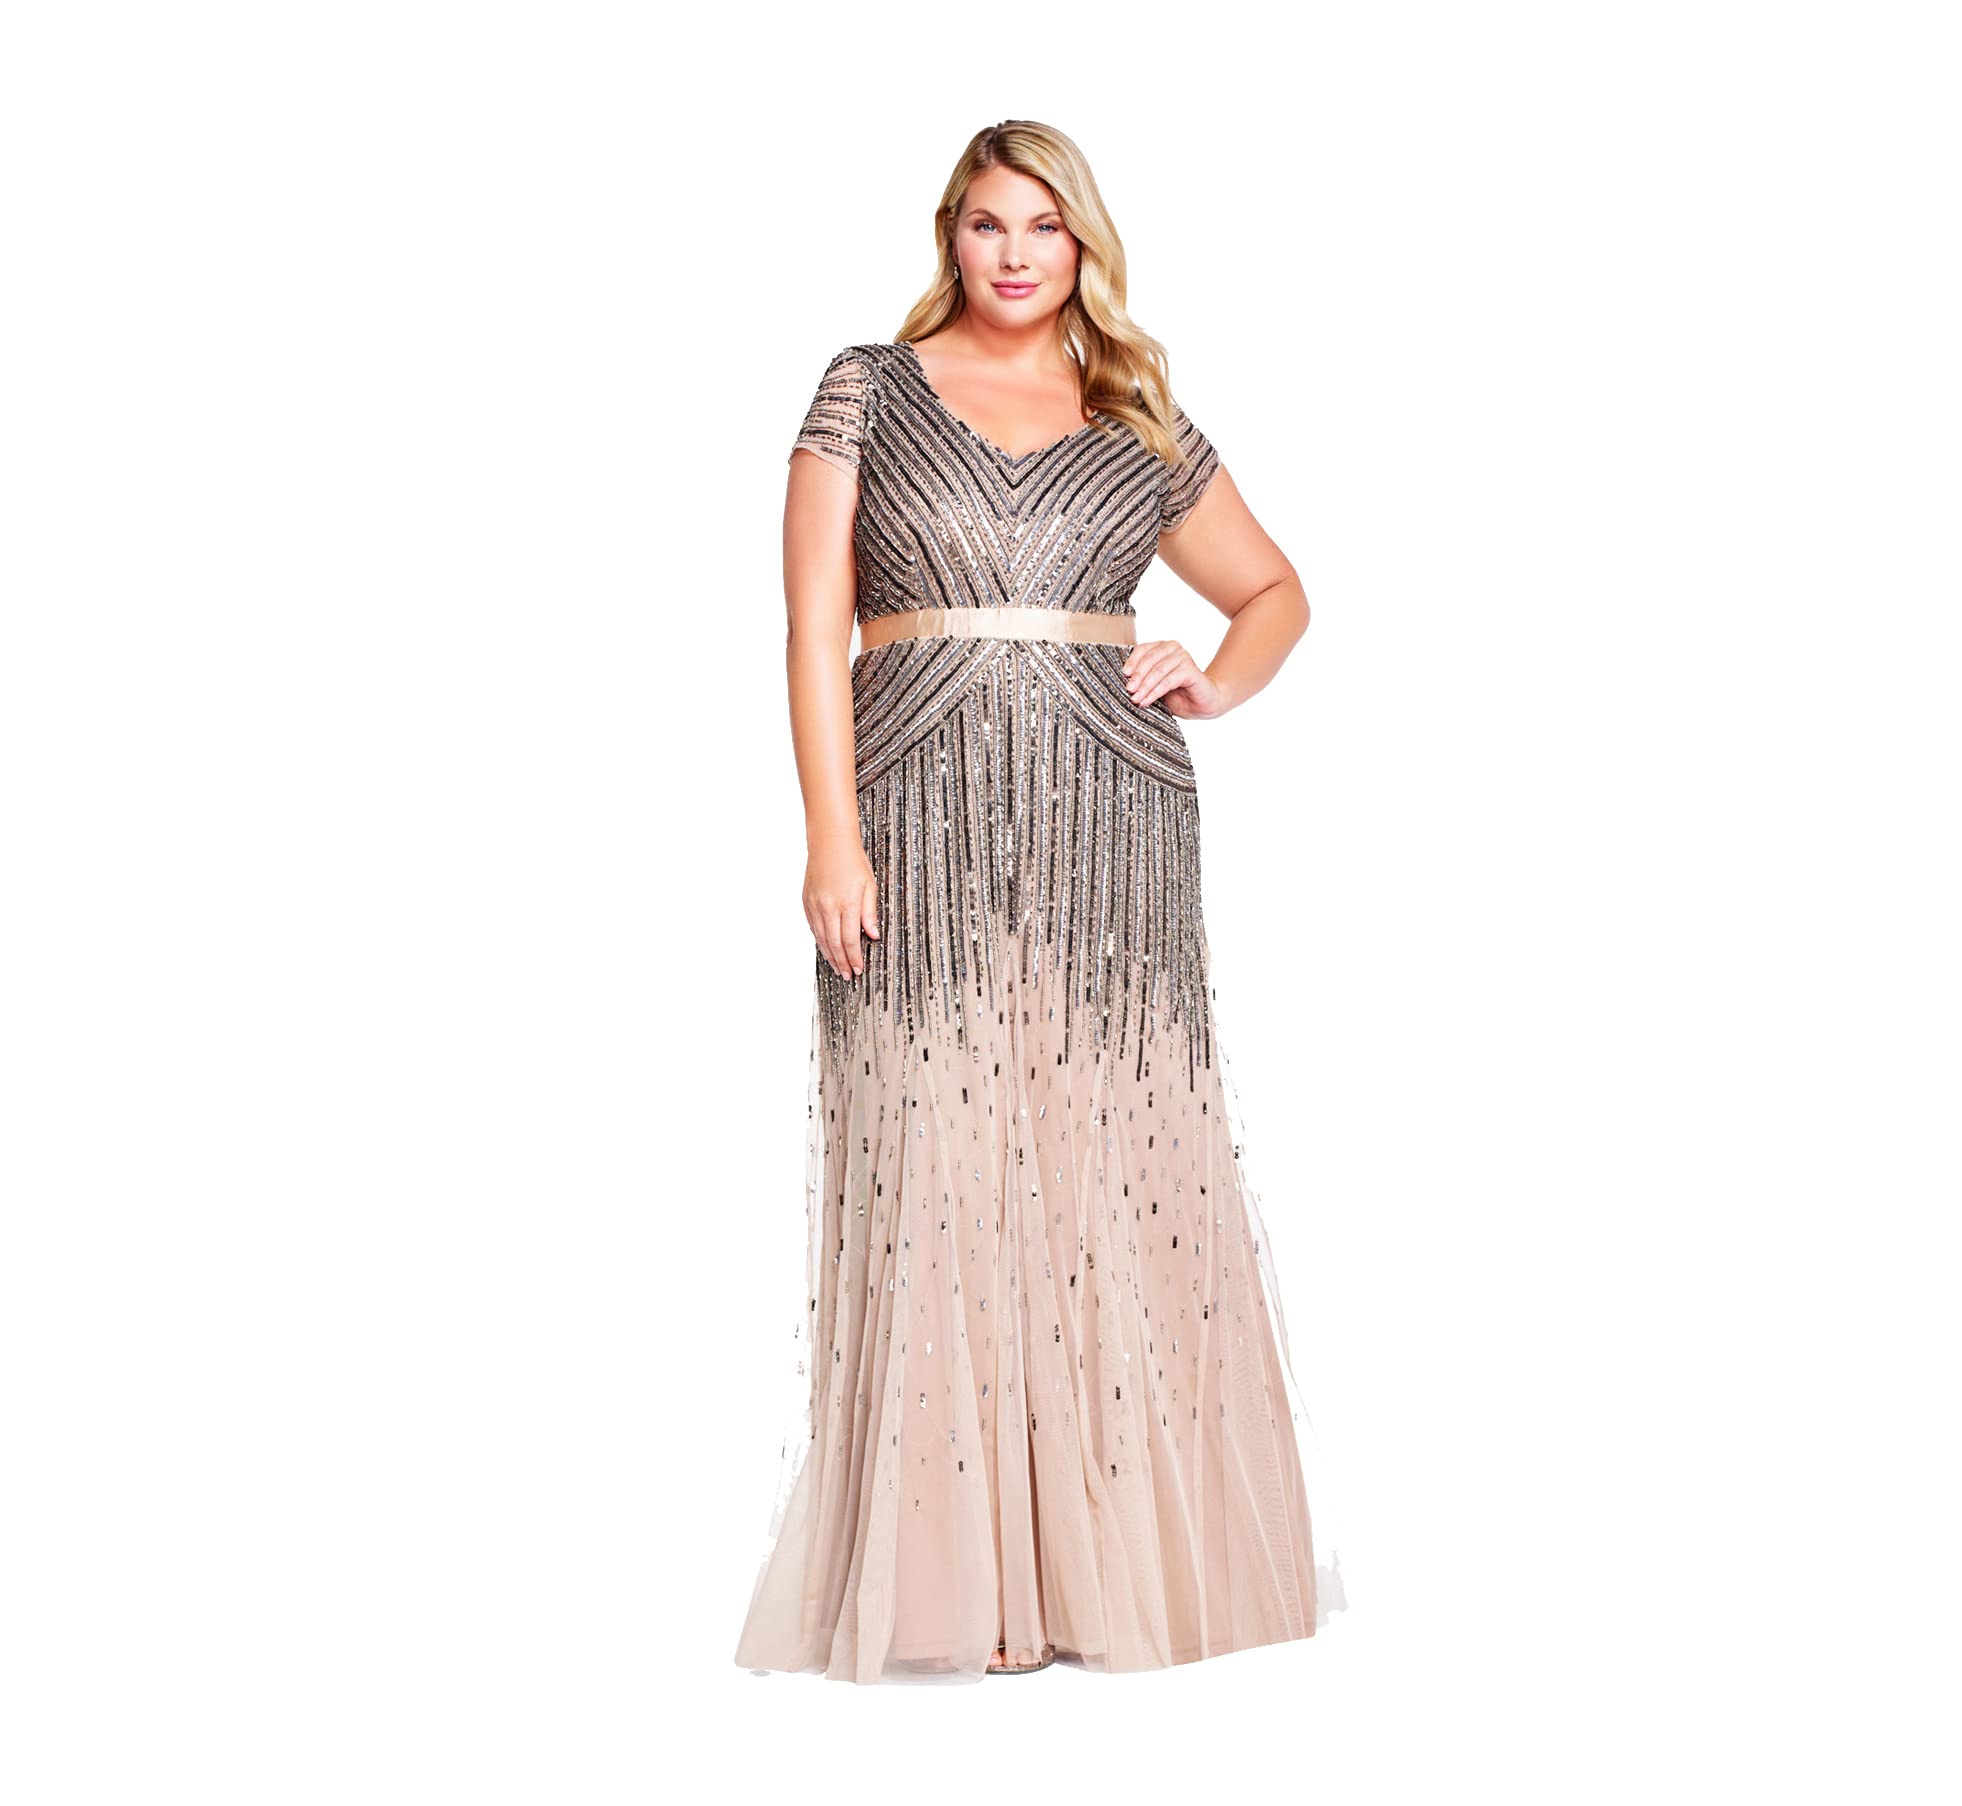 Adrianna Papell Women's Plus-Size Long Cap-Sleeve Gown